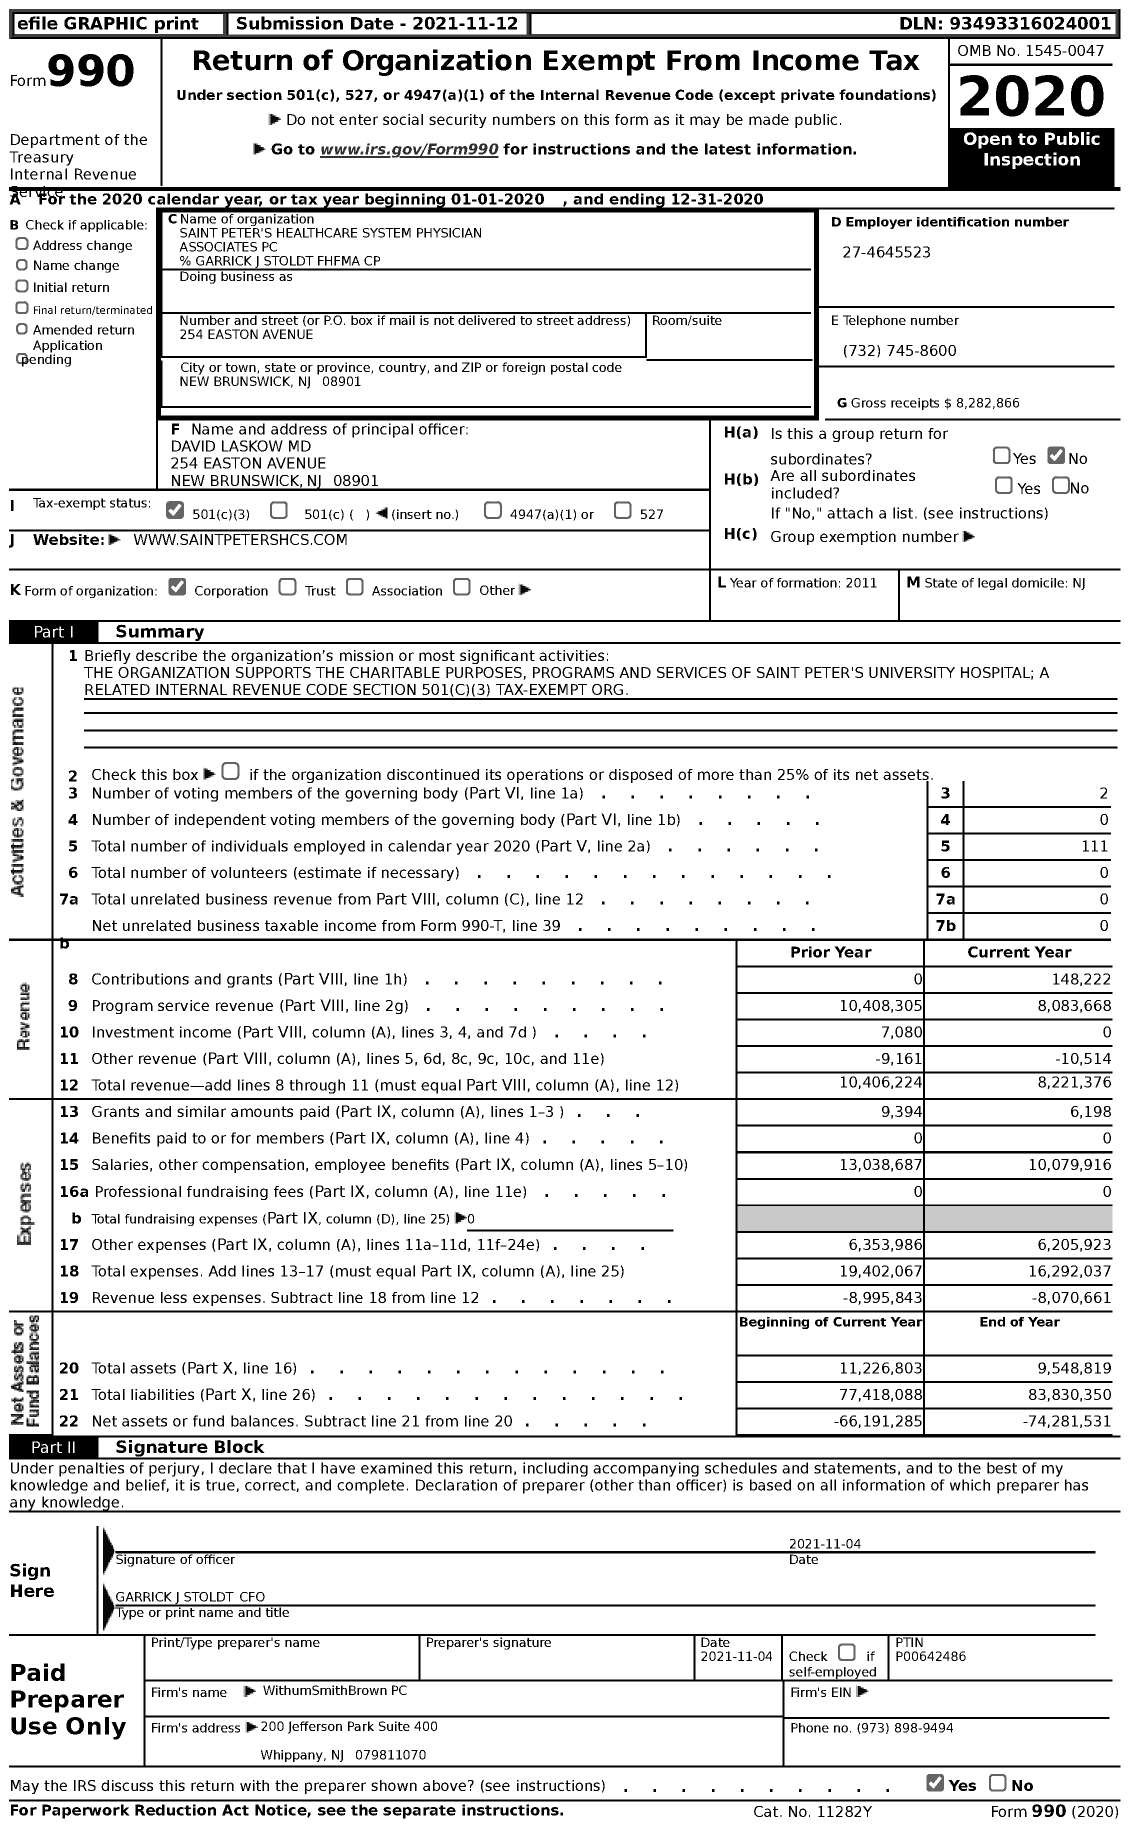 Image of first page of 2020 Form 990 for Saint Peter's Healthcare System Physician Associates PC